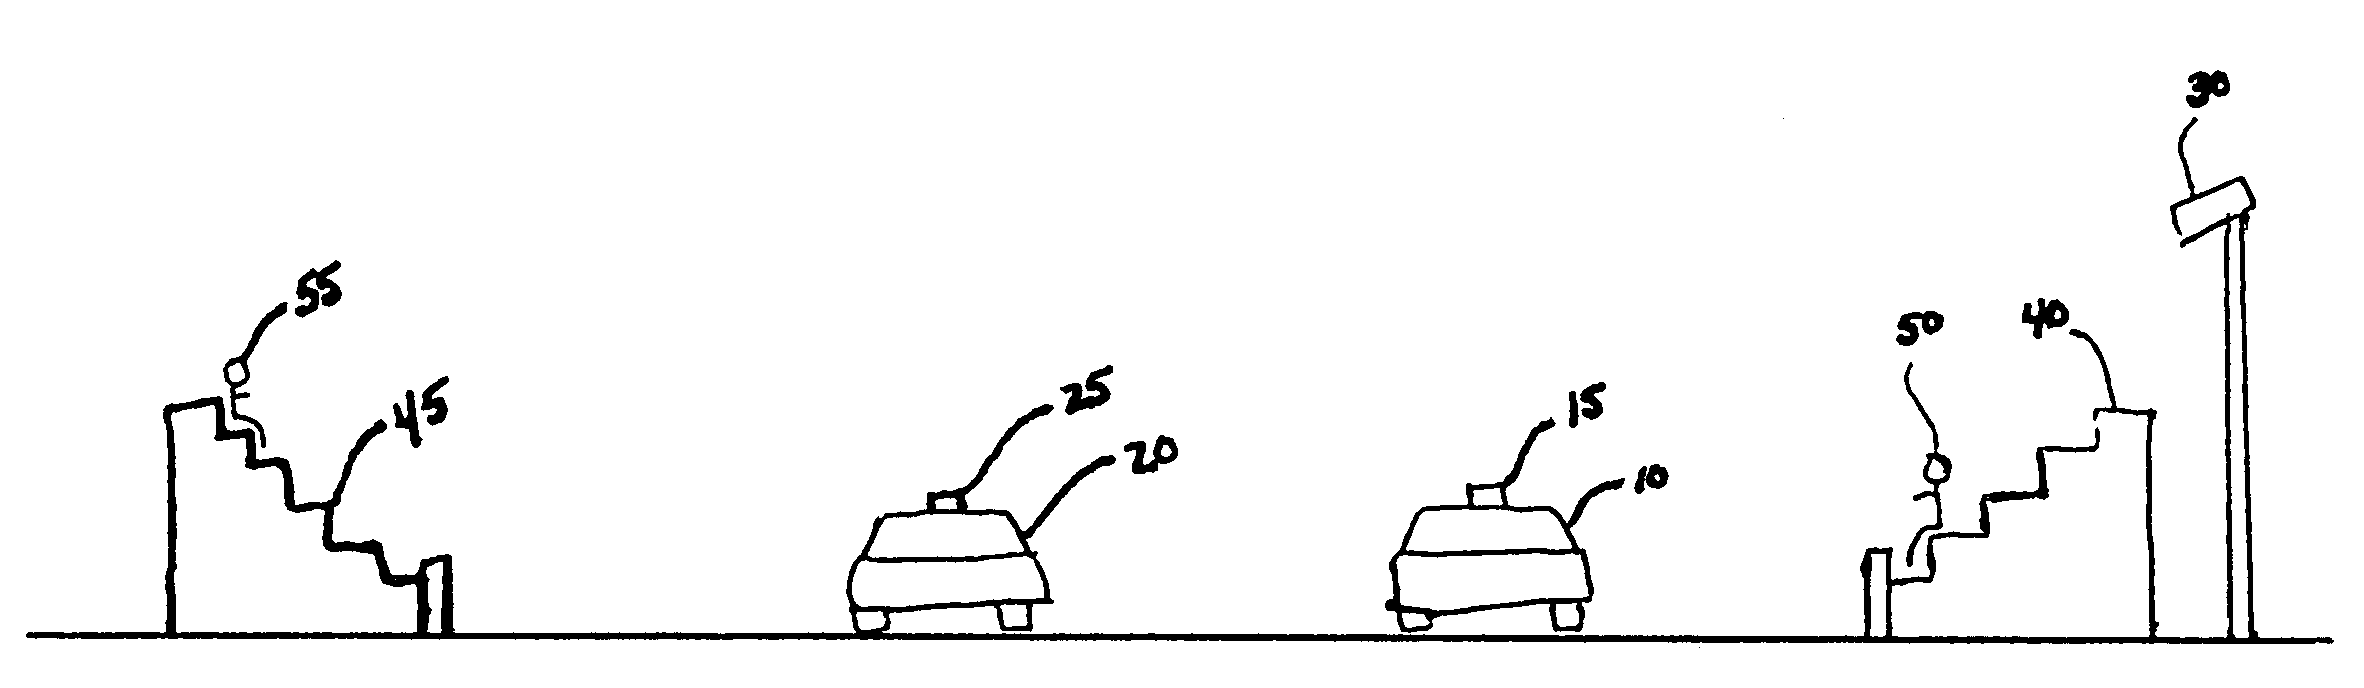 Racing vehicle position indication system and method